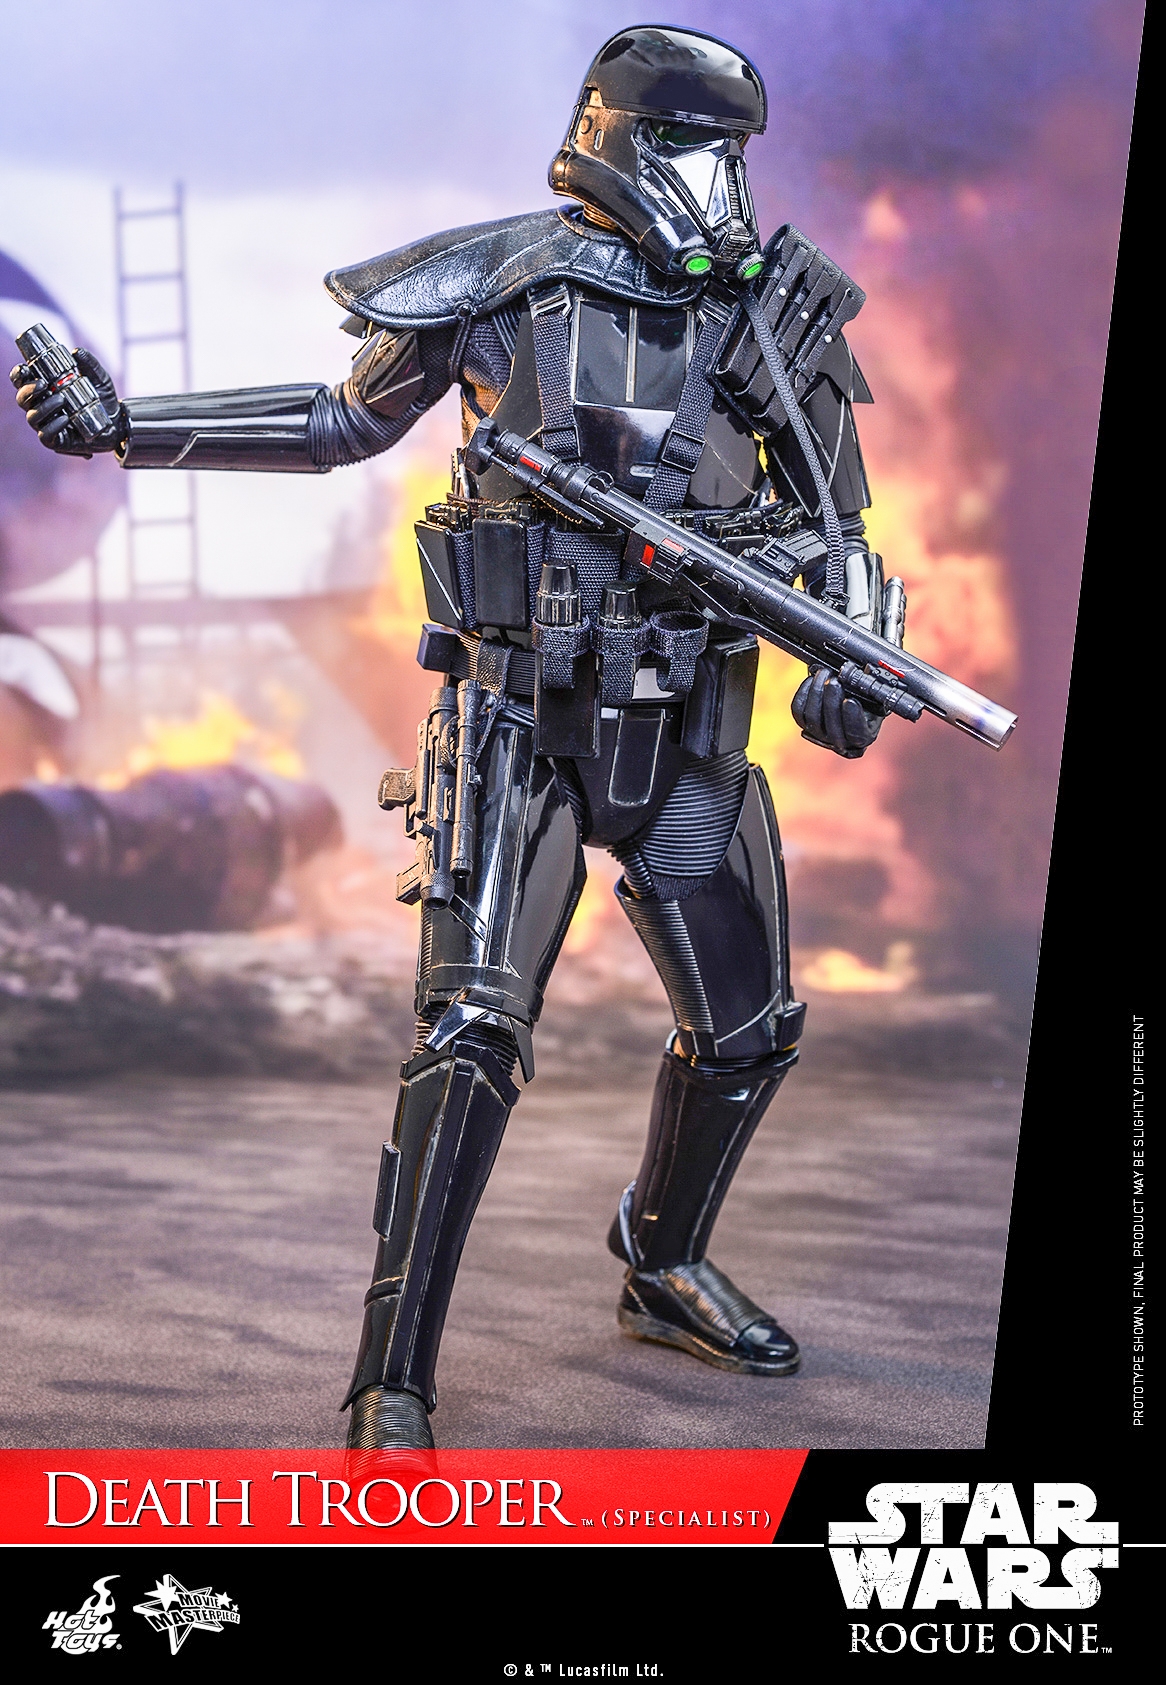 Hot-Toys-MMS385-Rogue-One-Death-Trooper-Specialist-011.jpg